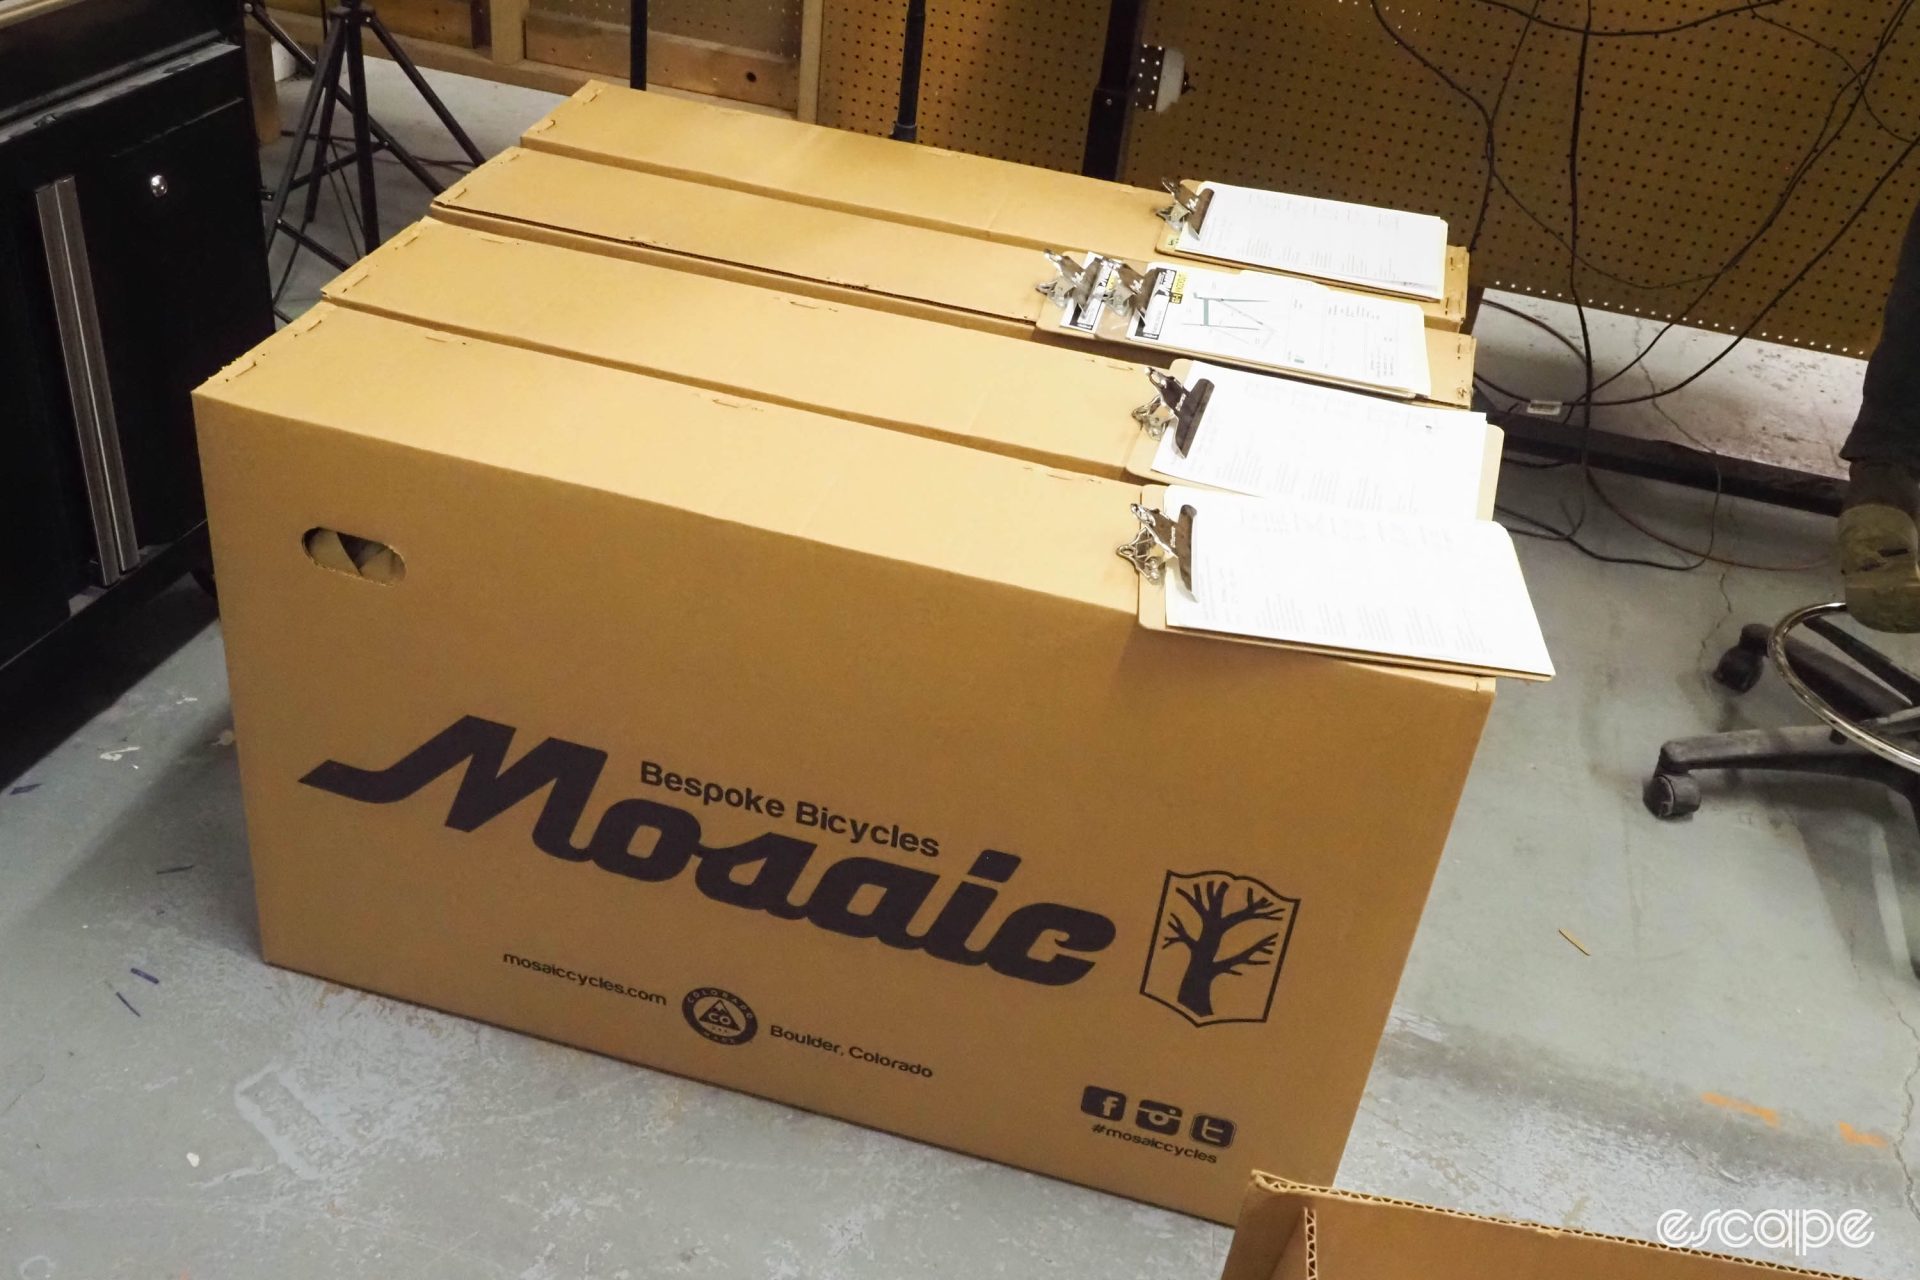 Four large shipping boxes marked "Mosaic Bespoke Bicycles" sit with customer order sheets.